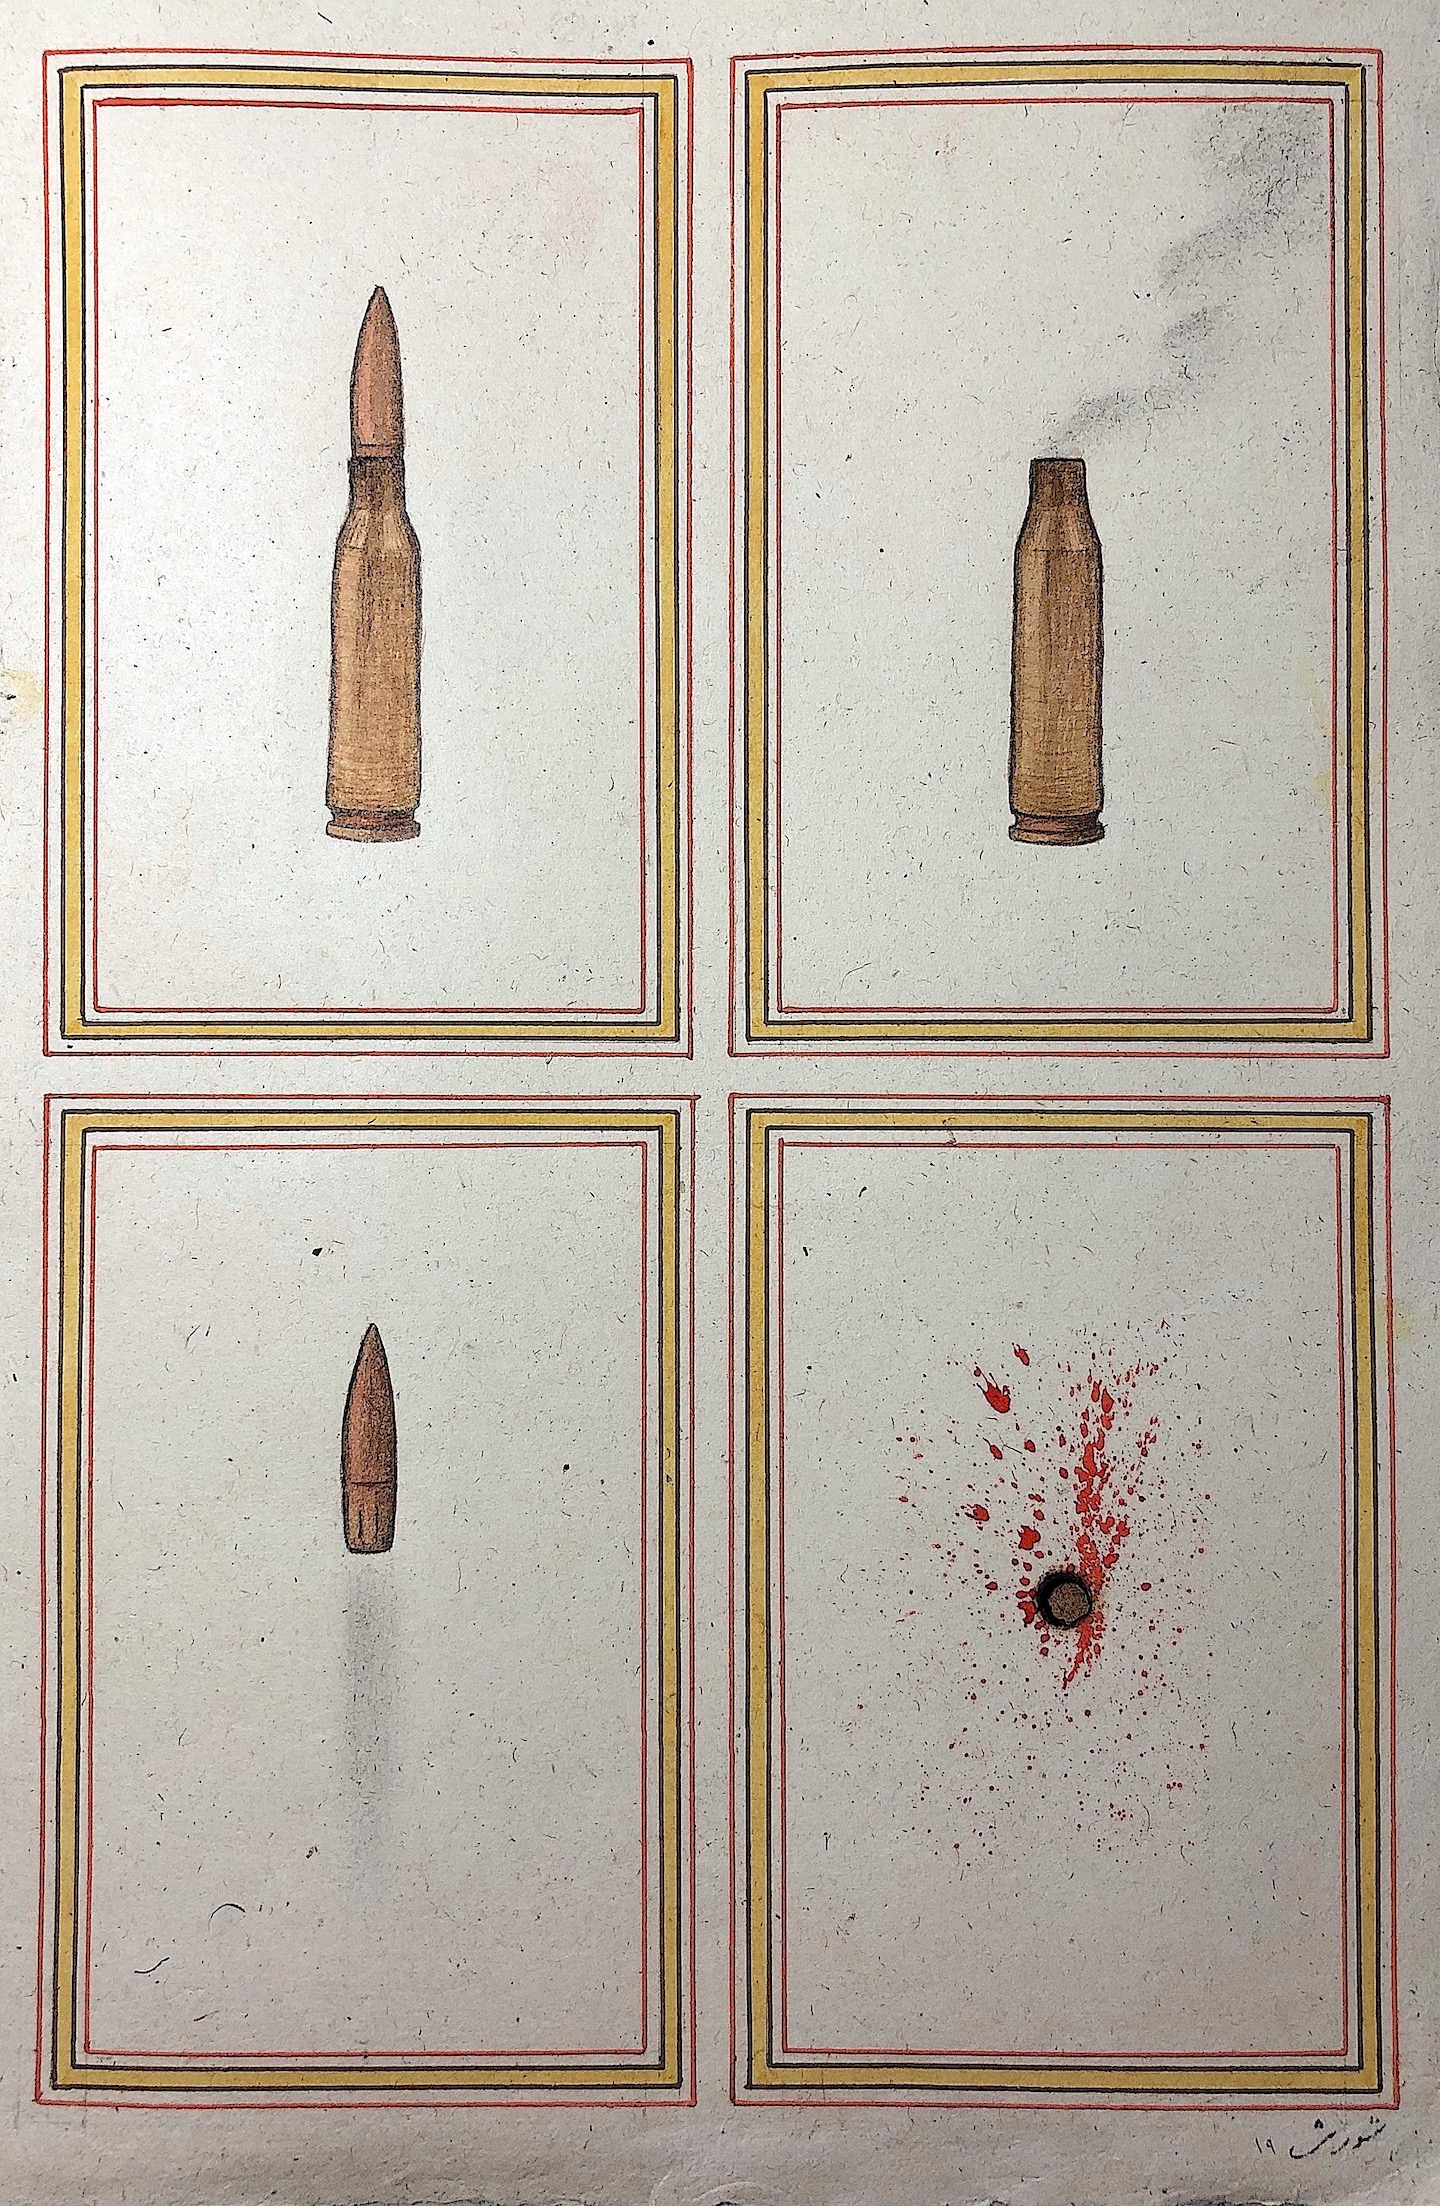 Four Seasons of War, 2020, Natural pigment on Indian paper, 40 x 28 cm.